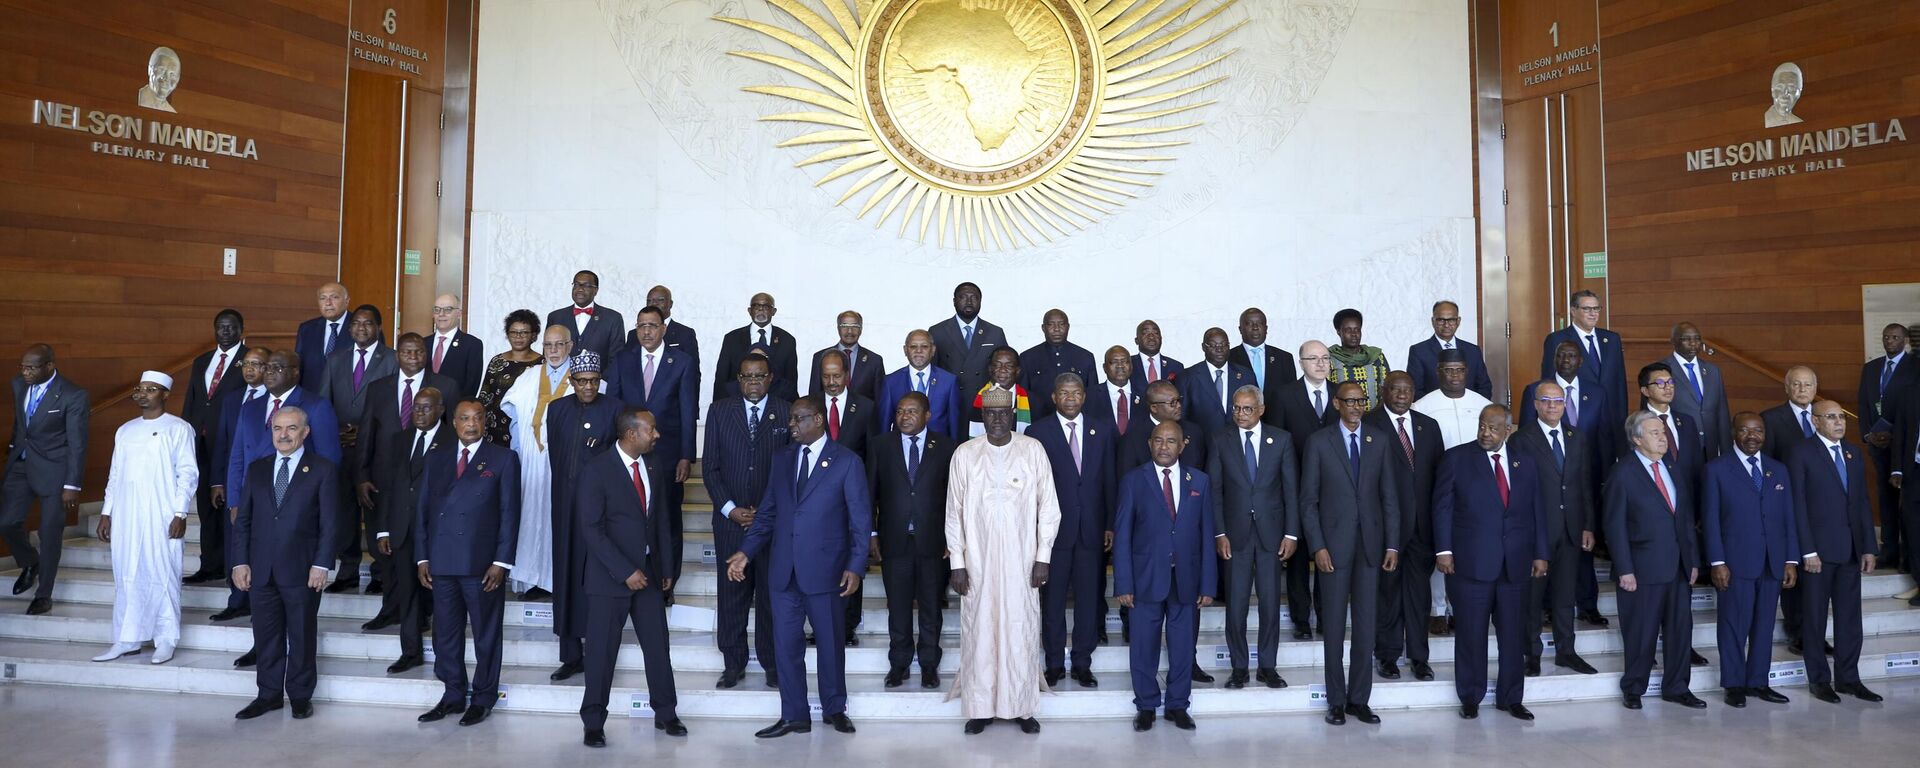 Leaders gather for a group photo at the African Union Summit in Addis Ababa, Ethiopia, Saturday, Feb. 18, 2023 - Sputnik International, 1920, 15.03.2023